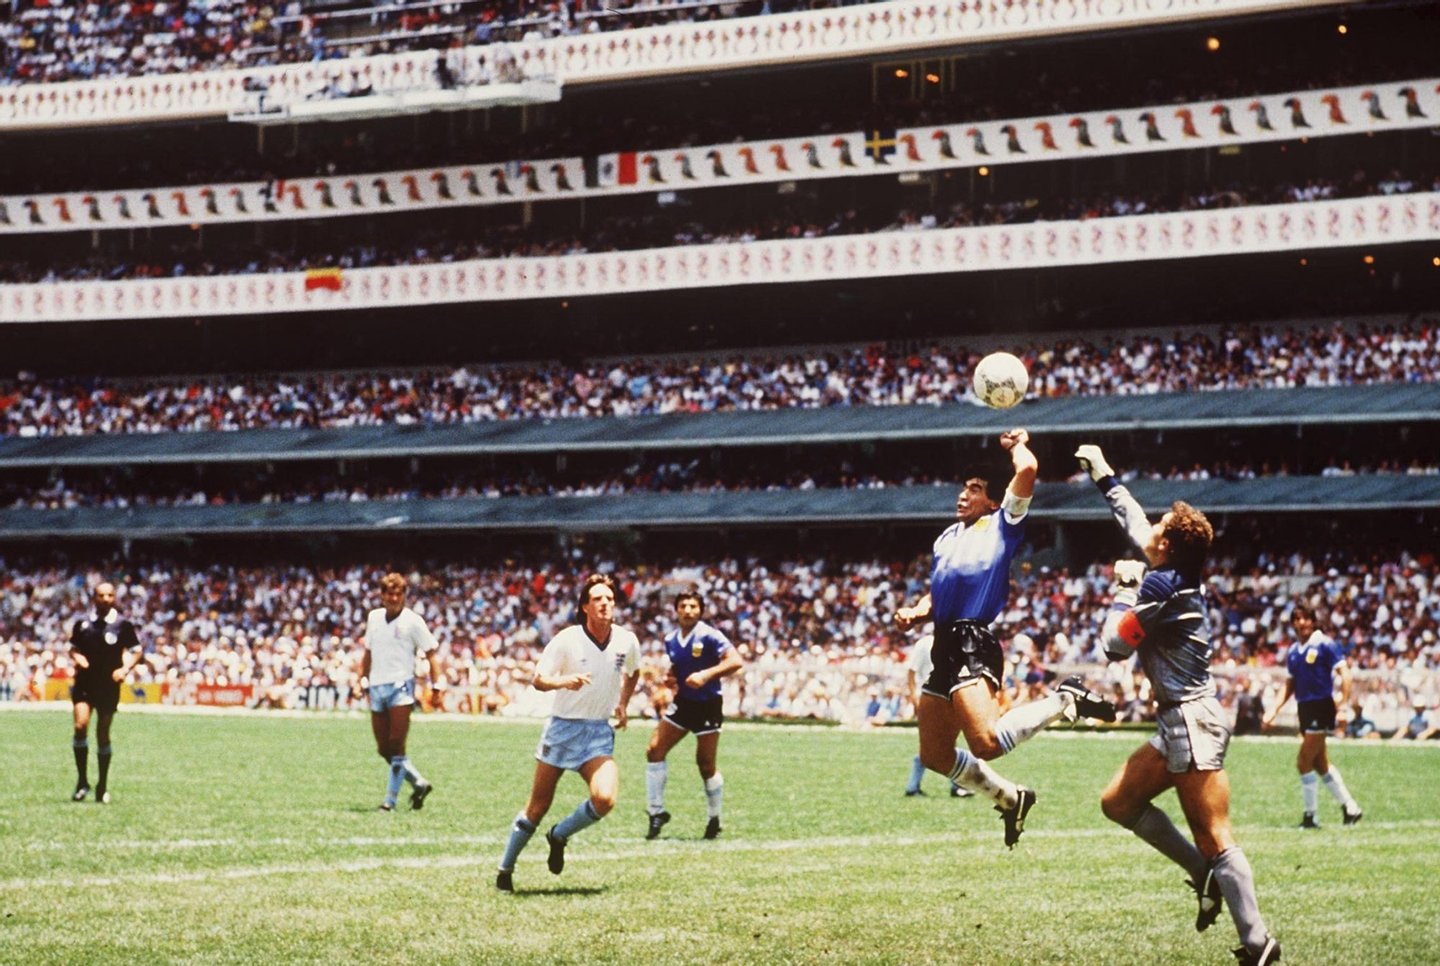 22 Jun 1986: Diego Maradona of Argentina handles the ball past Peter Shilton of England to score the opening goal of the World Cup Quarter Final at the Azteca Stadium in Mexico City, Mexico. Argentina won 2-1. FOTO:BONGARTS